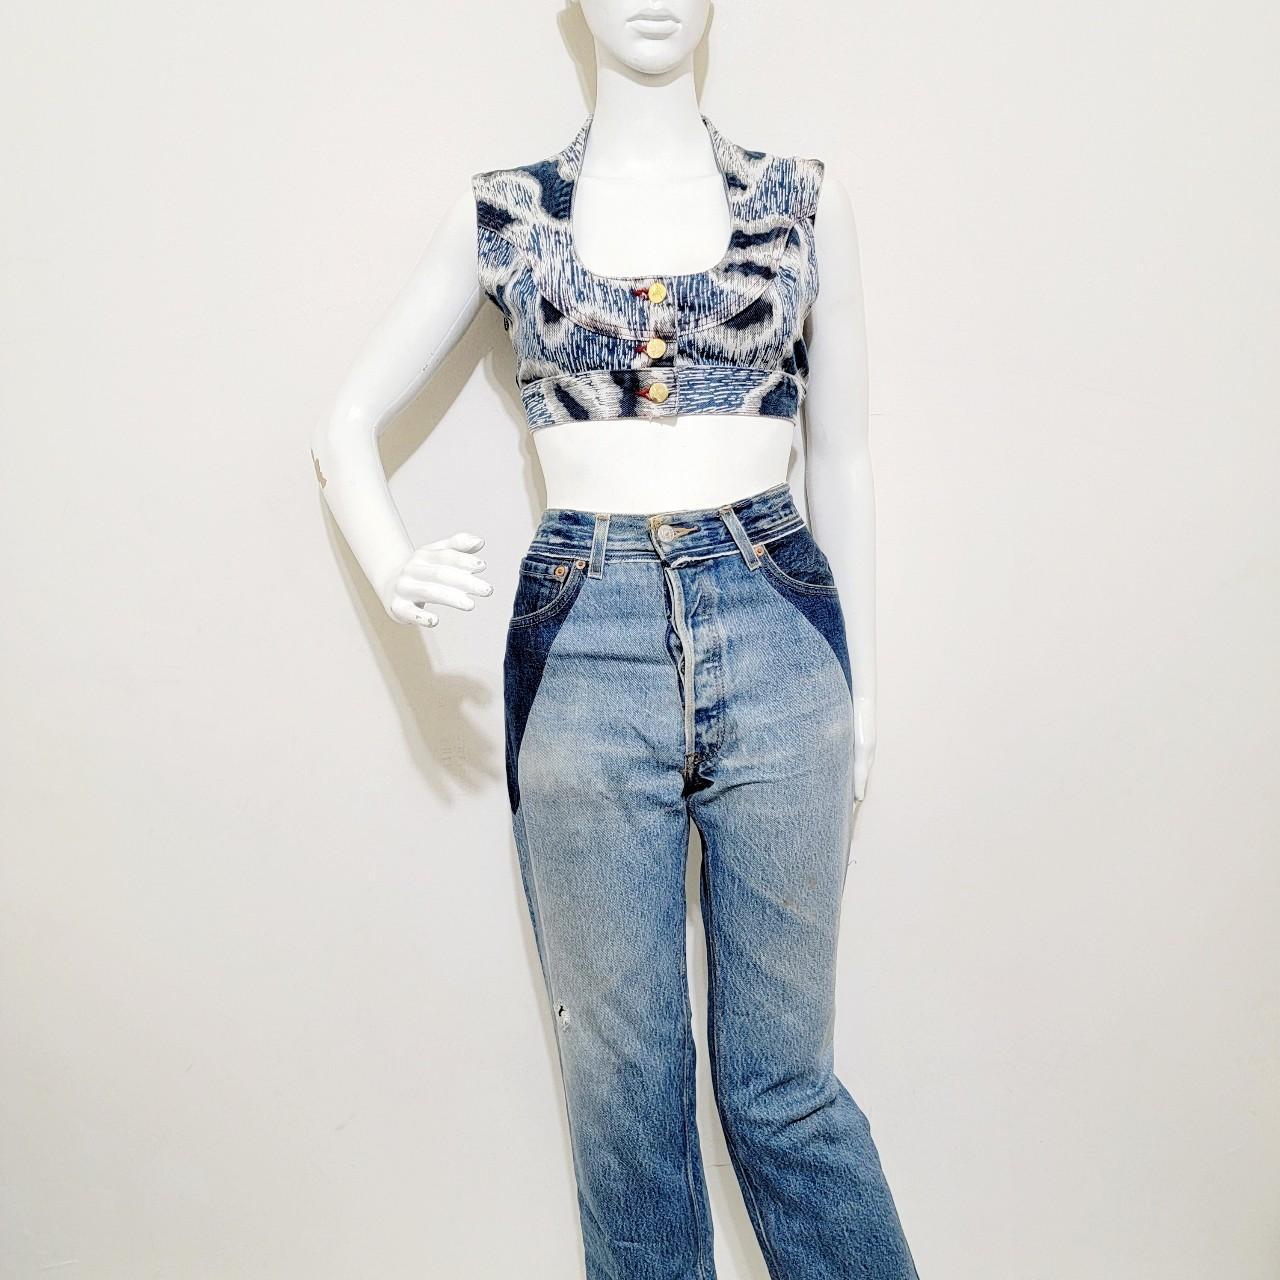 Vivienne Westwood Women's White and Blue Crop-top